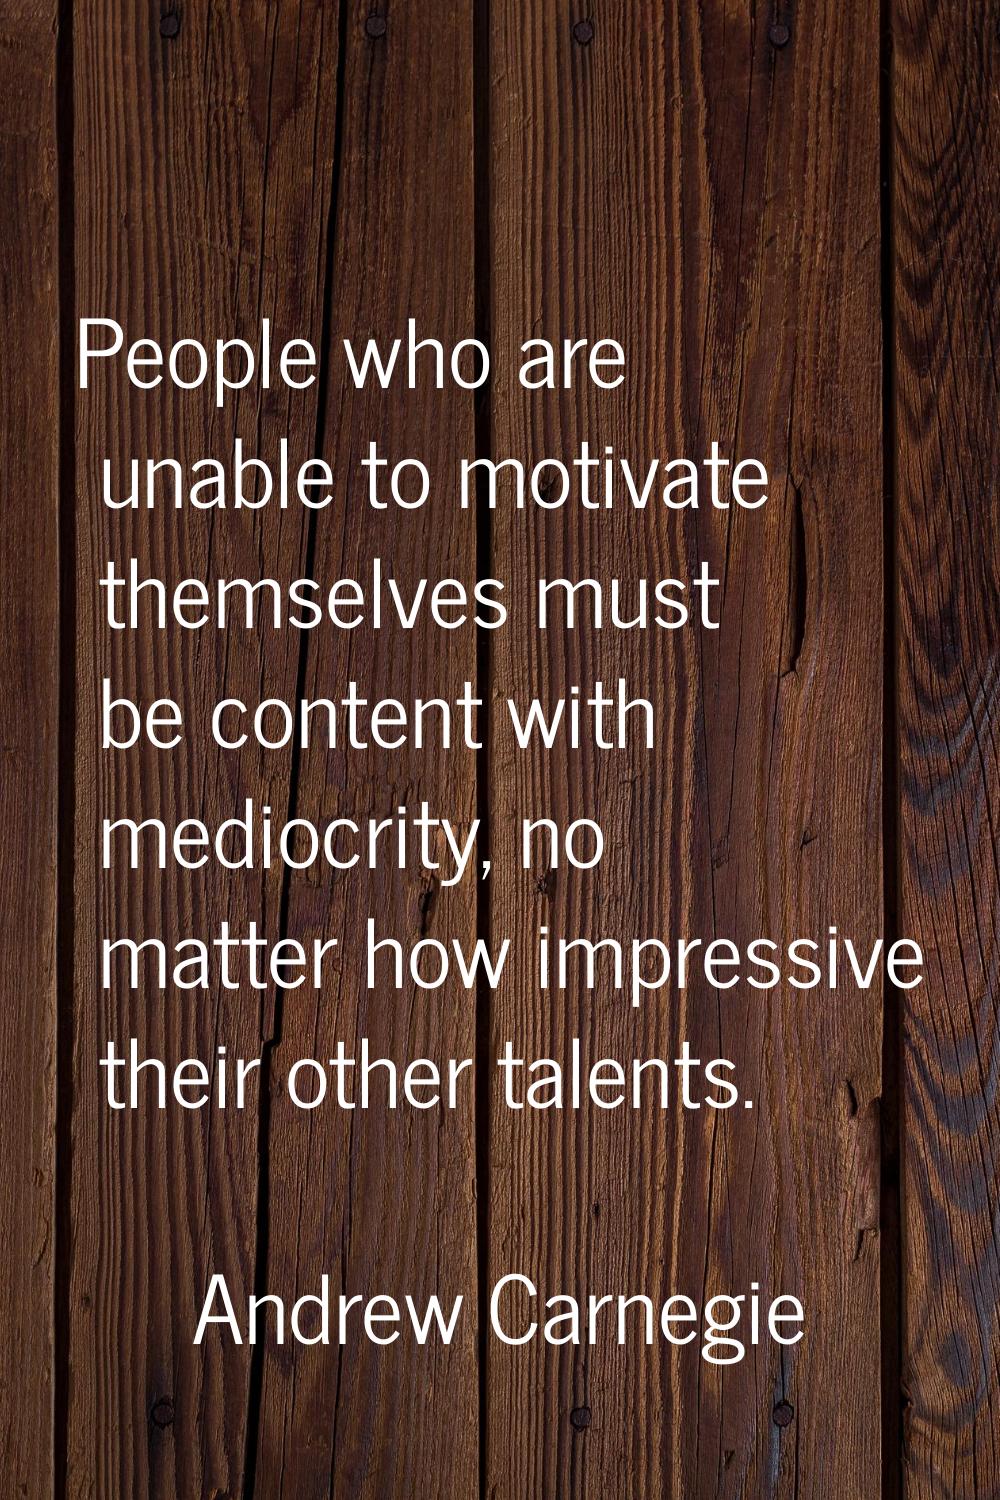 People who are unable to motivate themselves must be content with mediocrity, no matter how impress